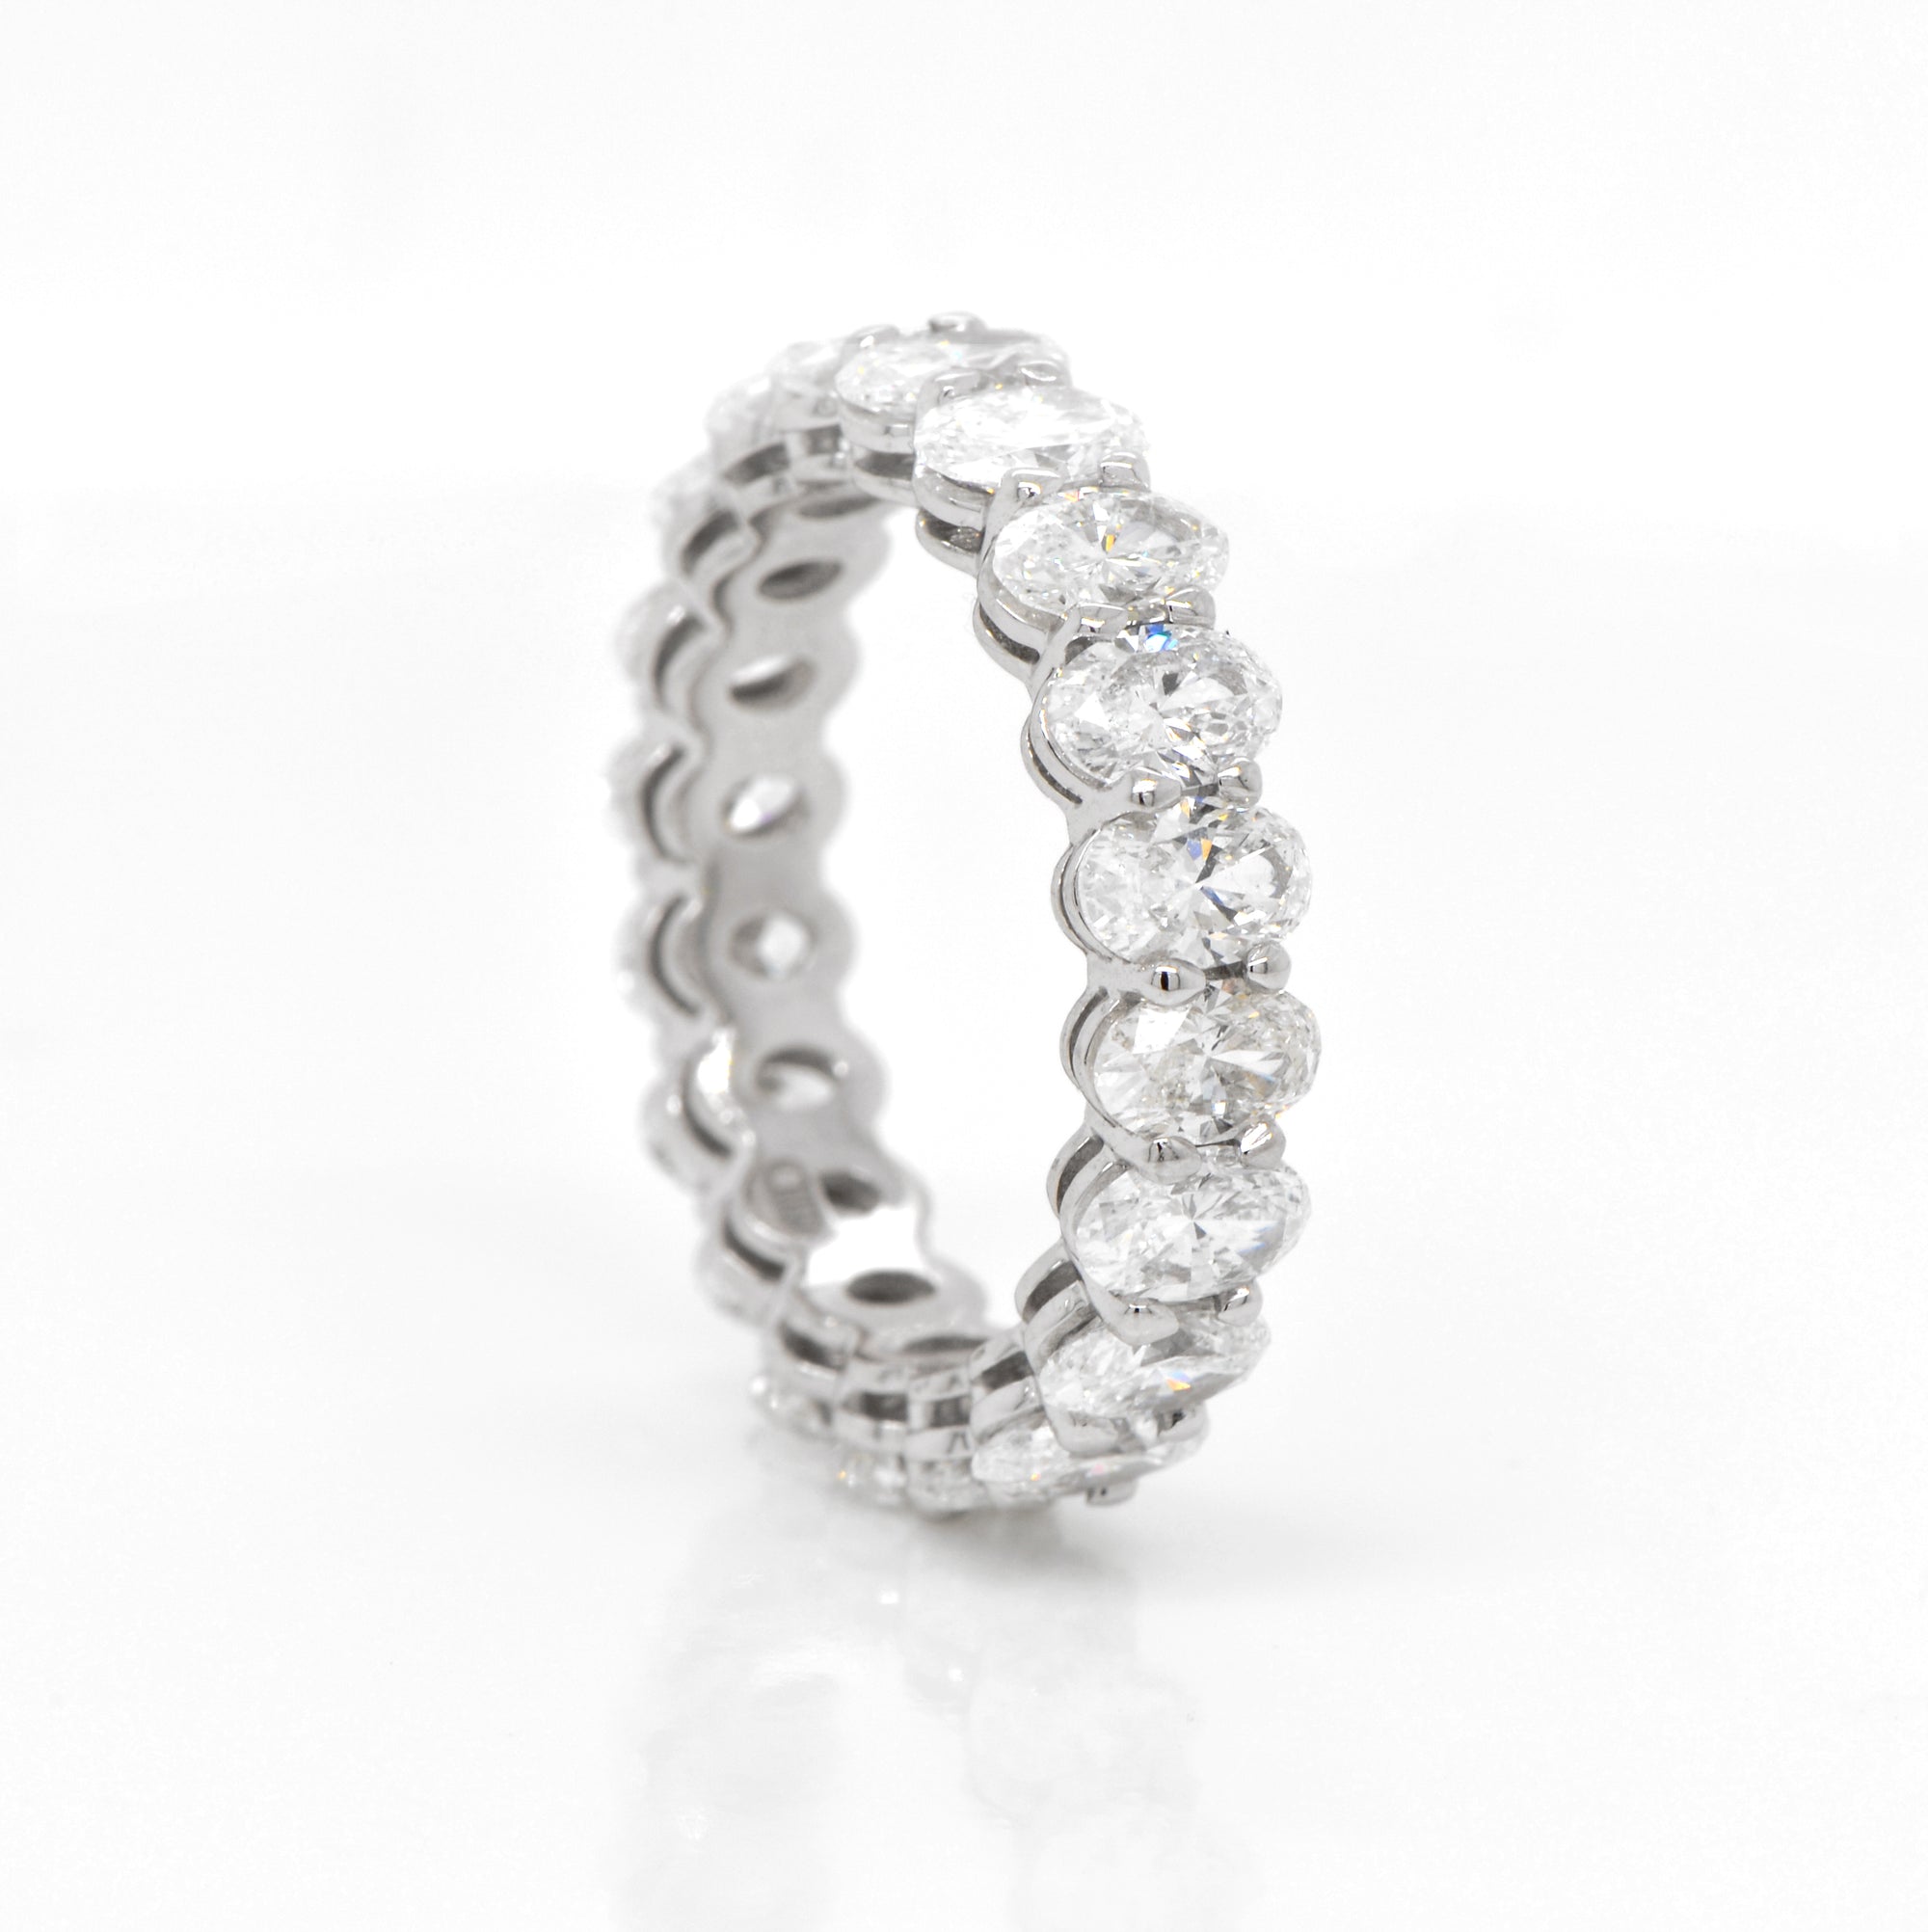 Platinum oval diamond eternity band featuring 20 oval diamonds (F-G color, VS-SI clarity) weighing a total of 4.09 carats.